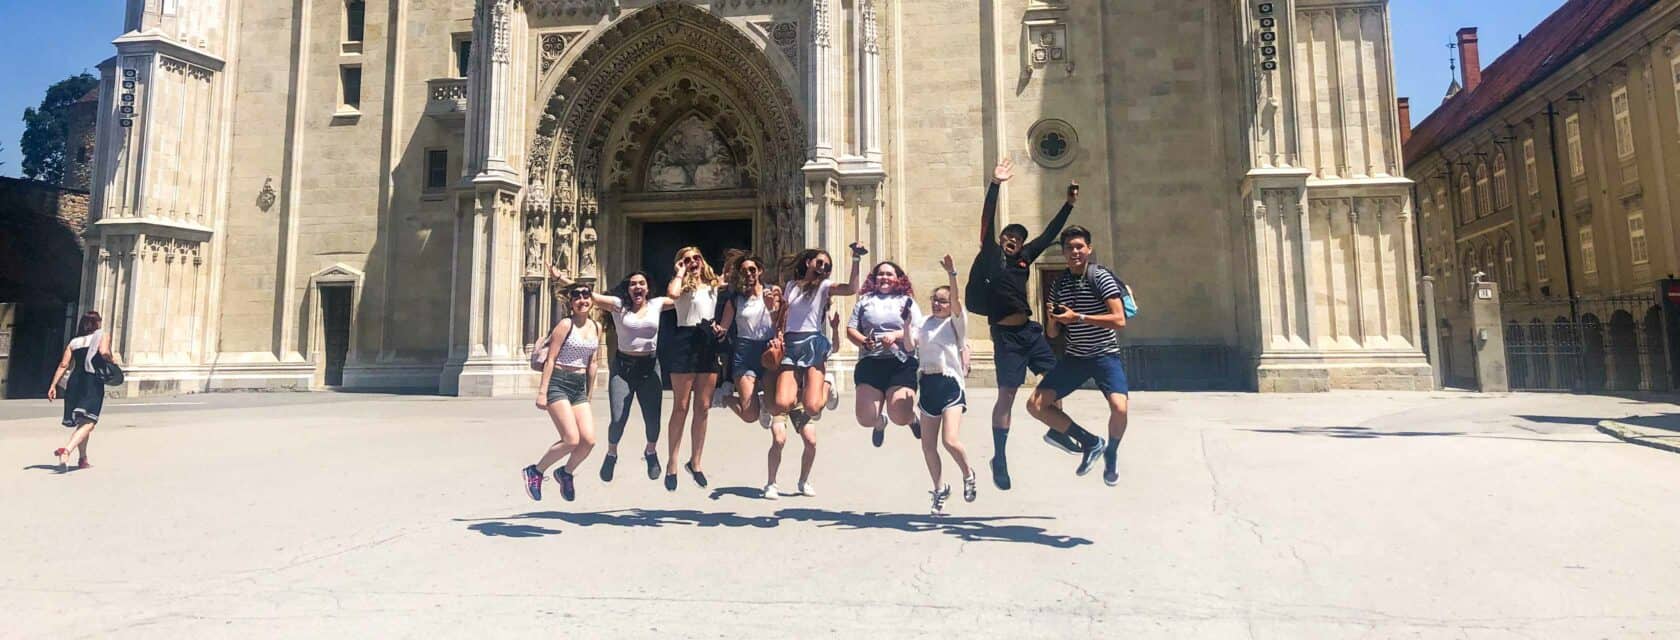 Students jumping in the air in front of a historical site.